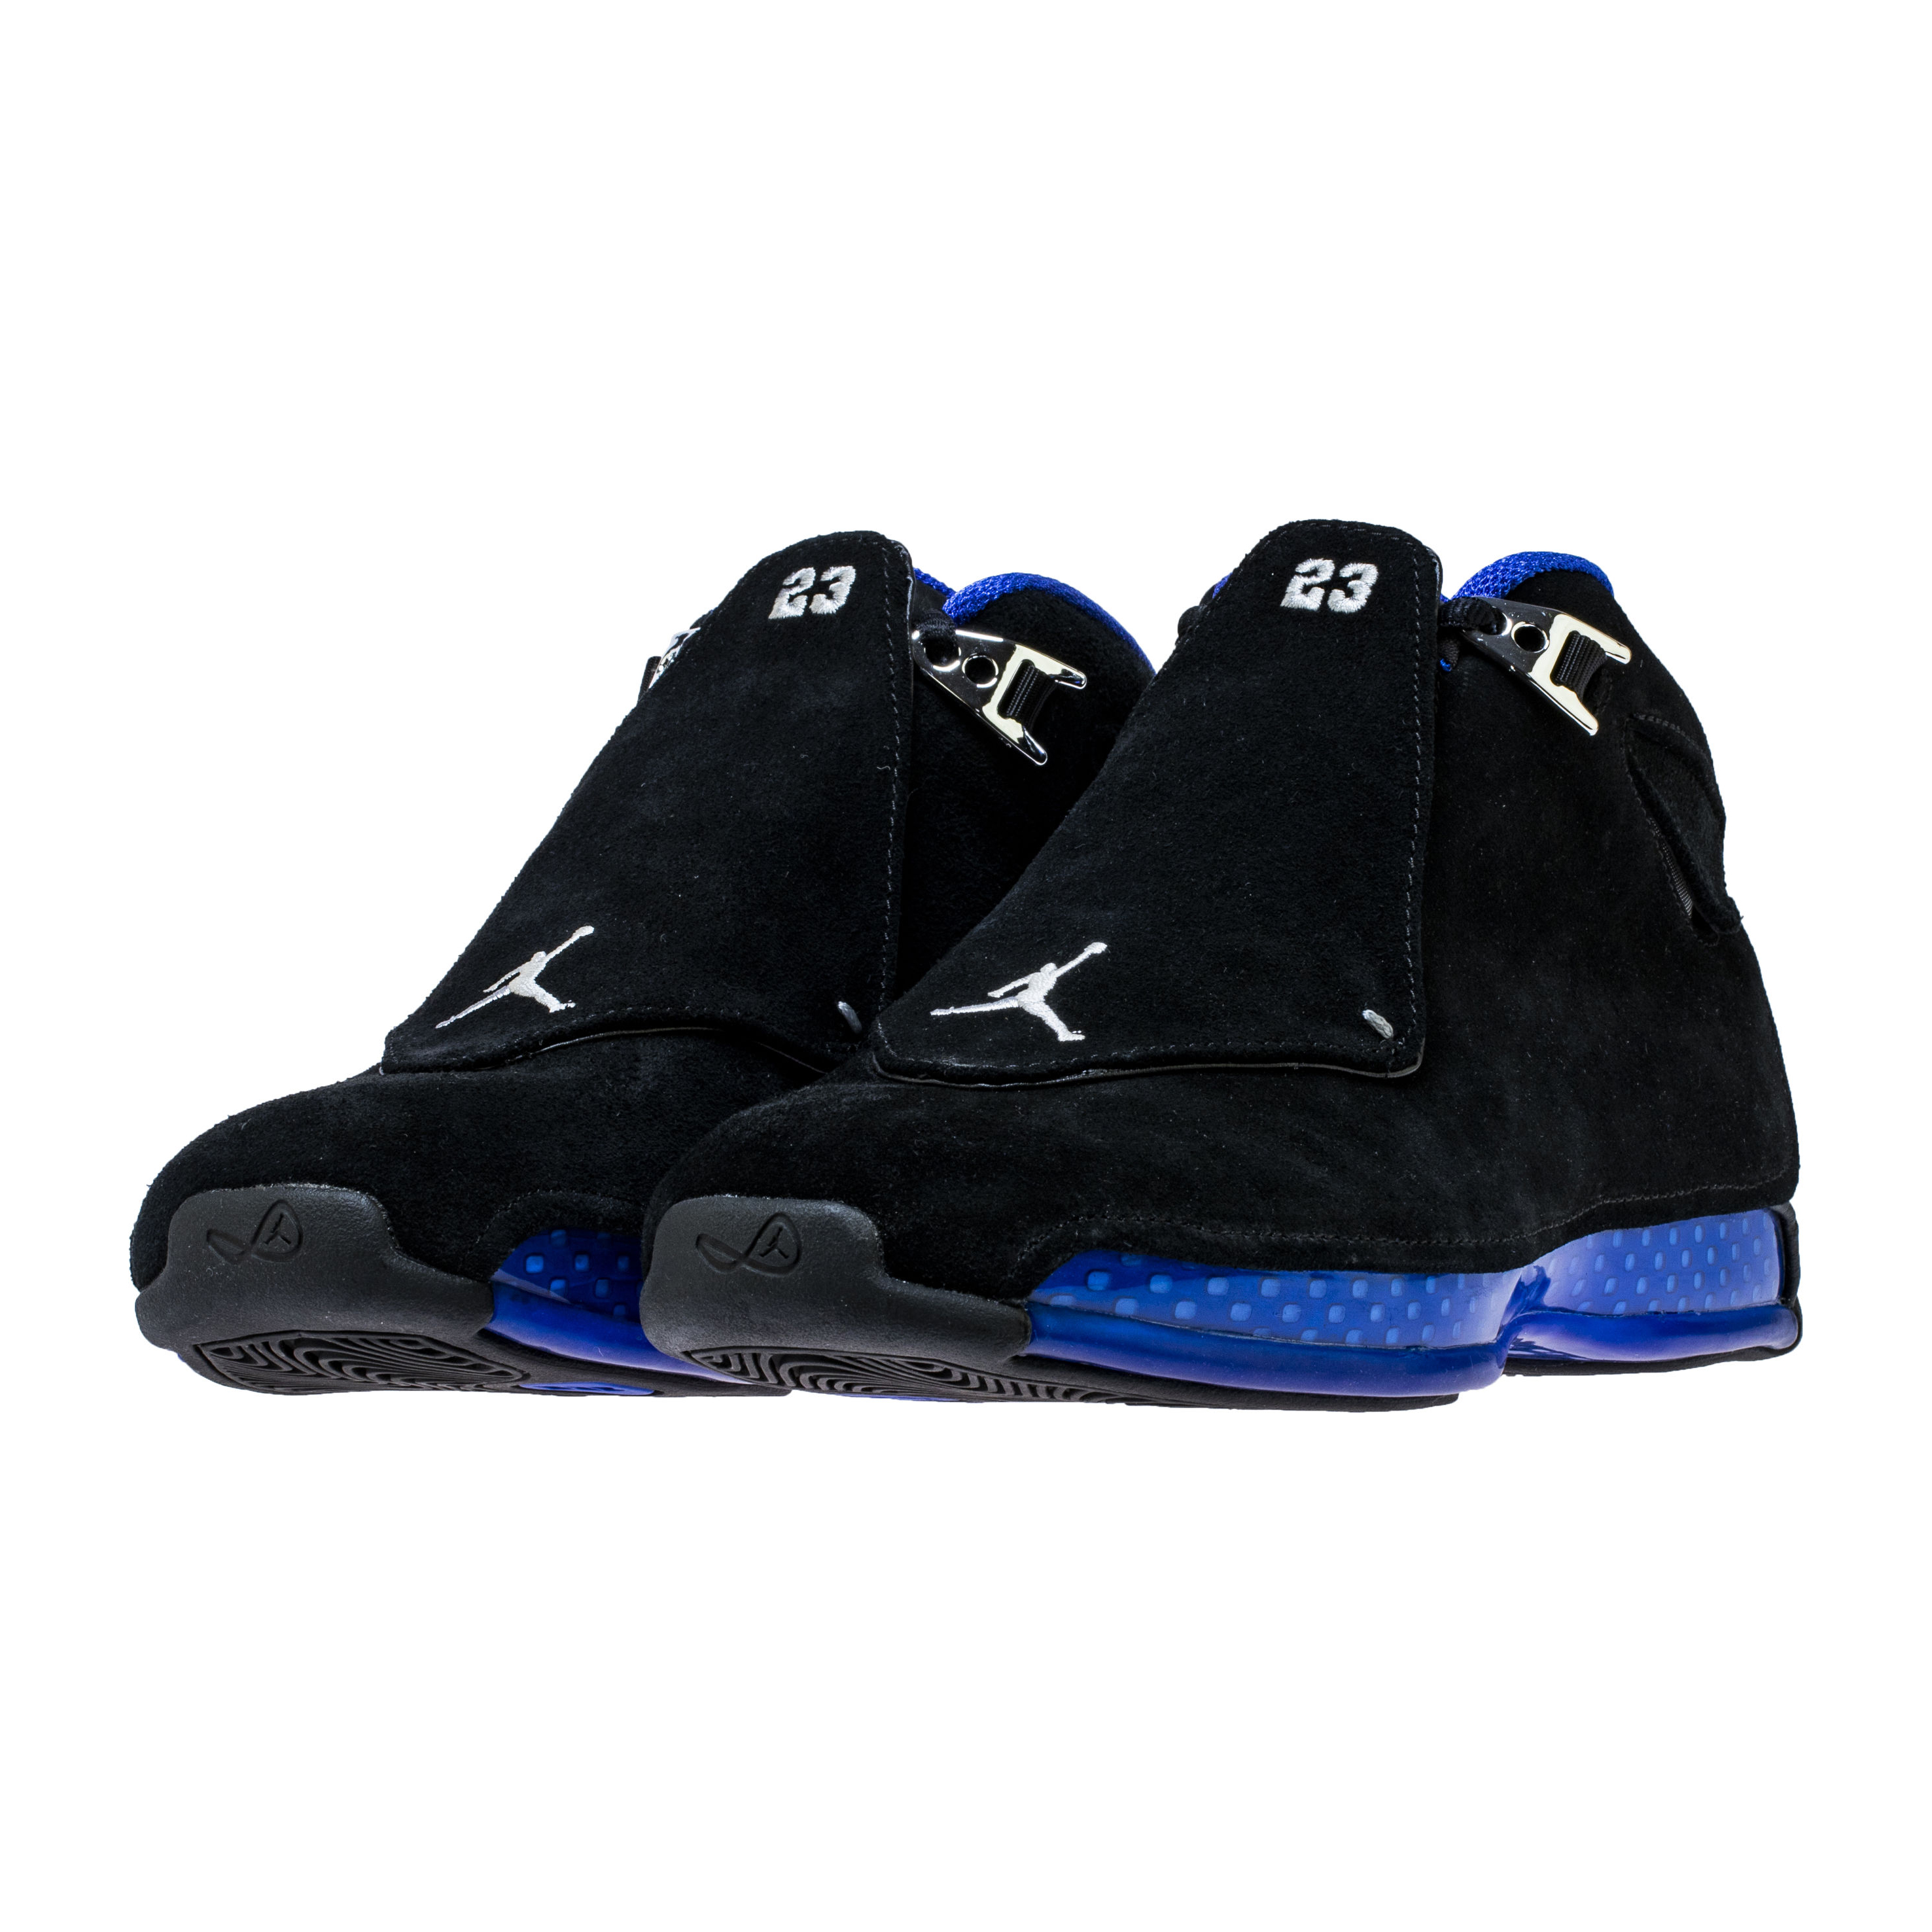 Sea anemone discord front The Air Jordan 18 'Black Sport Royal' Release Date Has Been Moved Up -  WearTesters